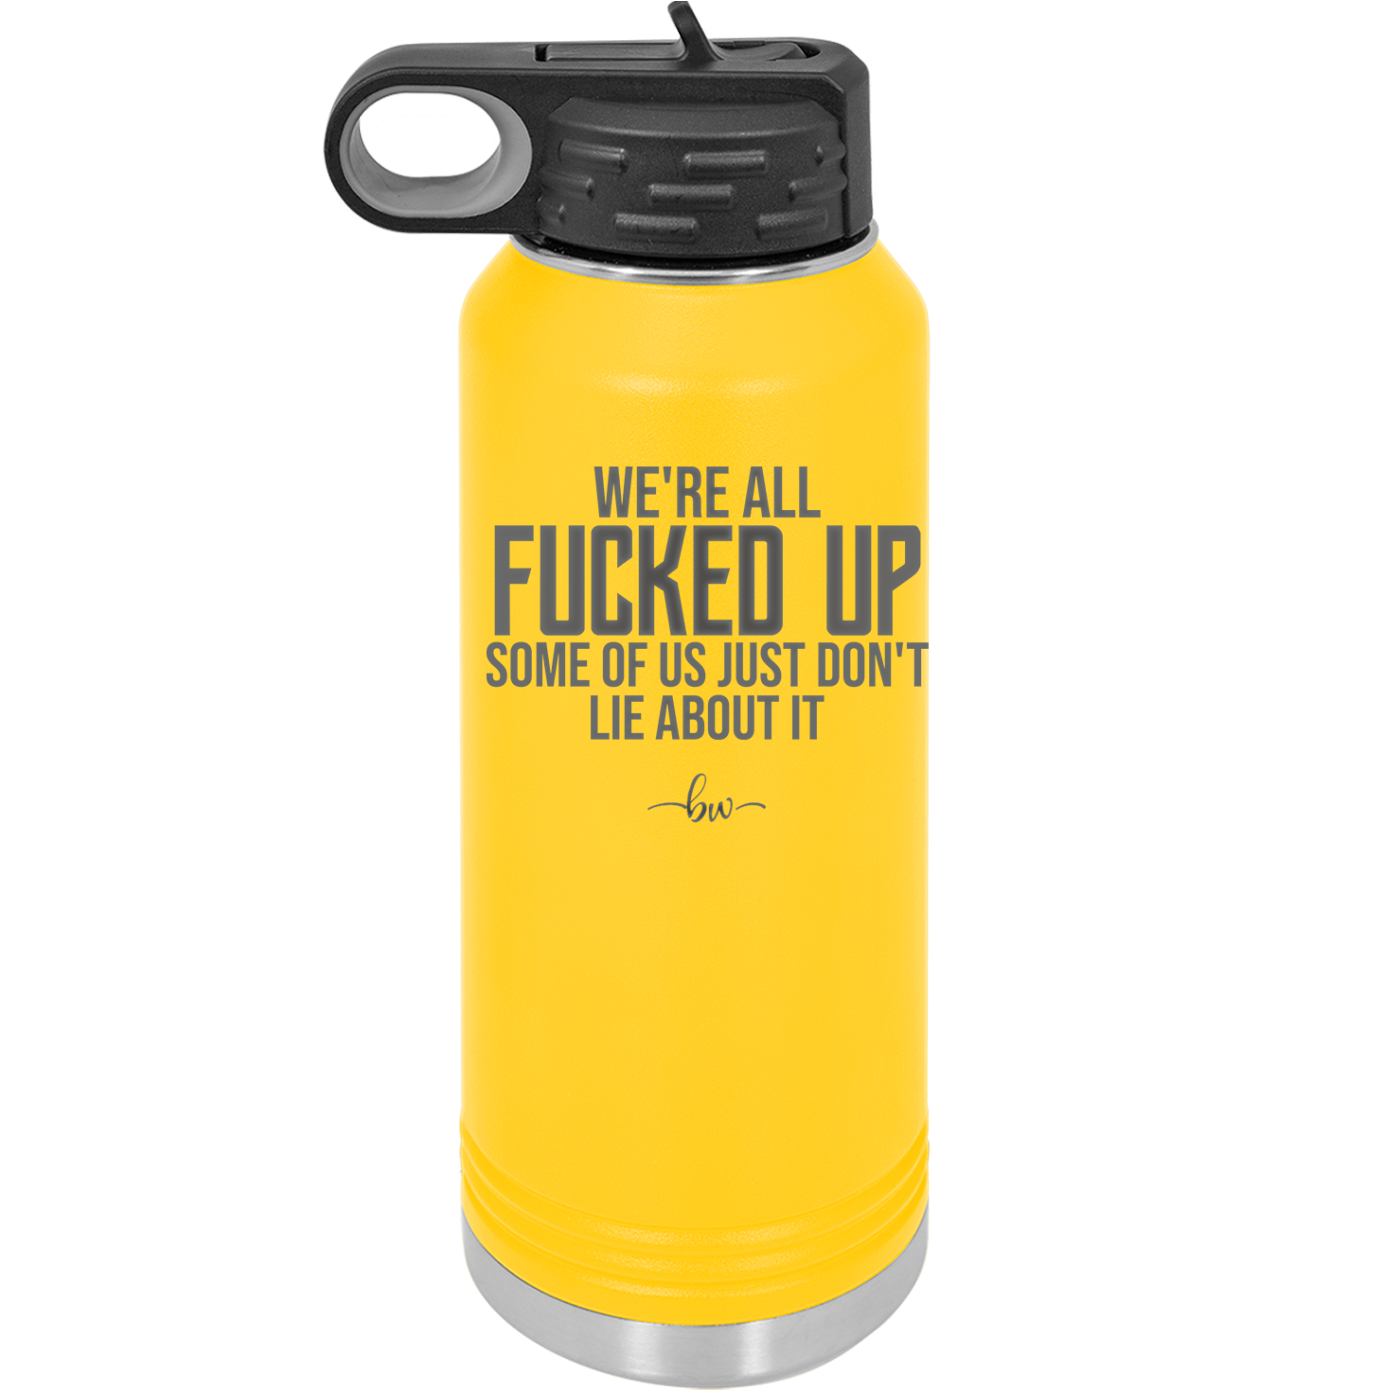 We're all Fucked Up Some of Us Just Don't Lie About it - Laser Engraved Stainless Steel Drinkware - 2515 -